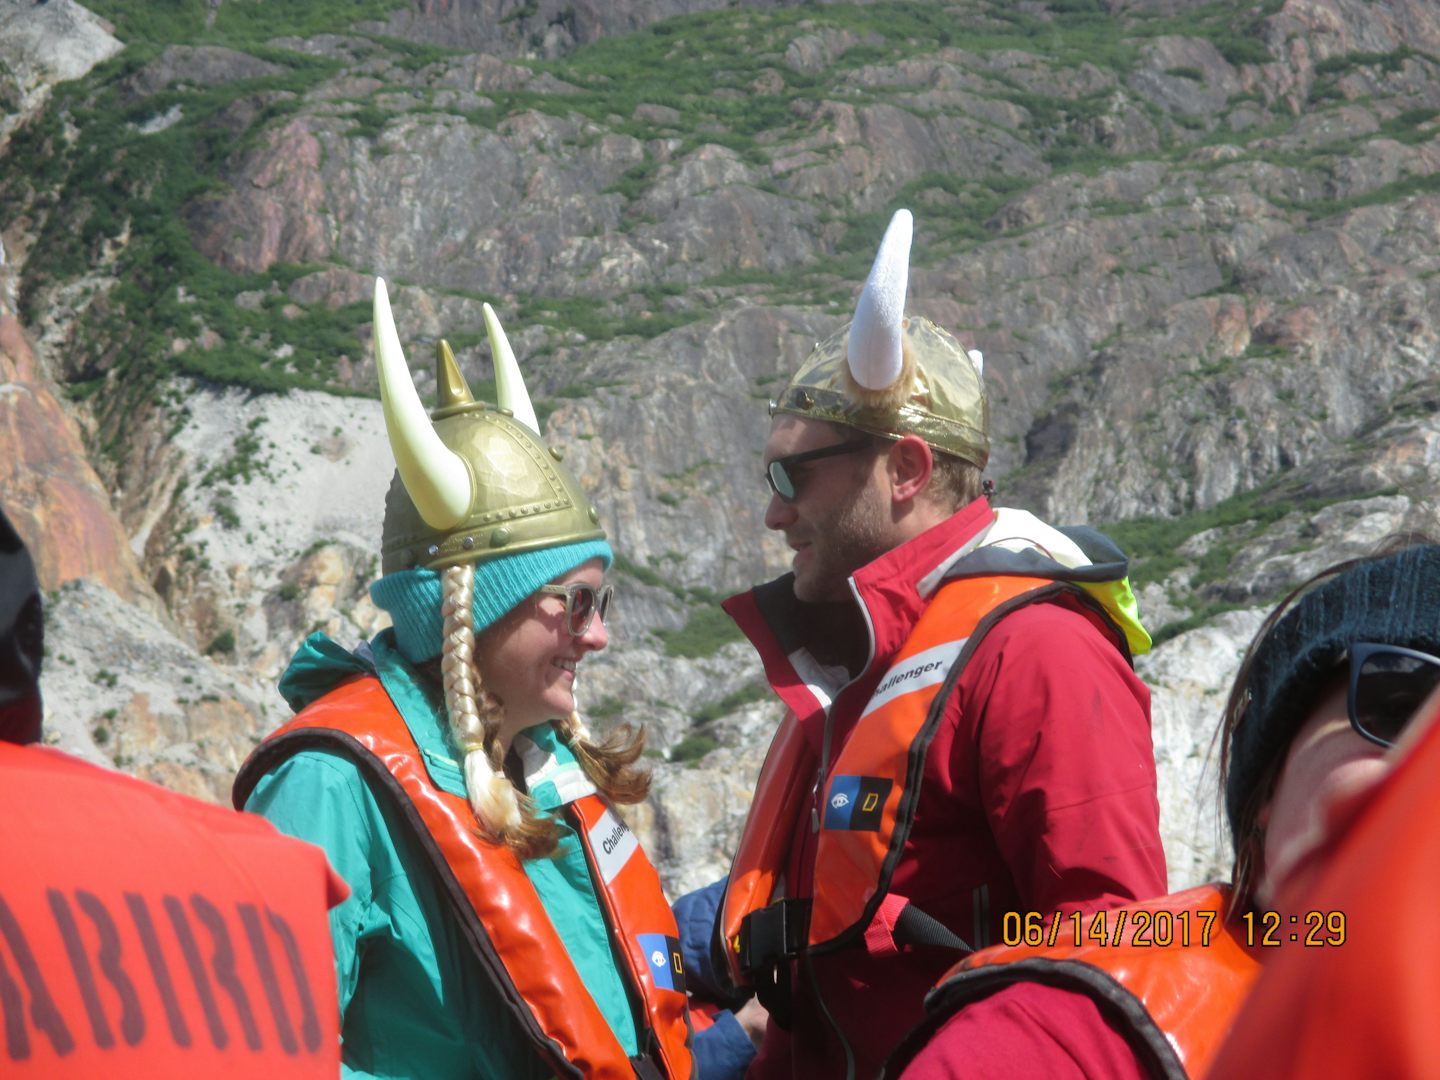 A welcome visit from the "Vikings" at the glacier